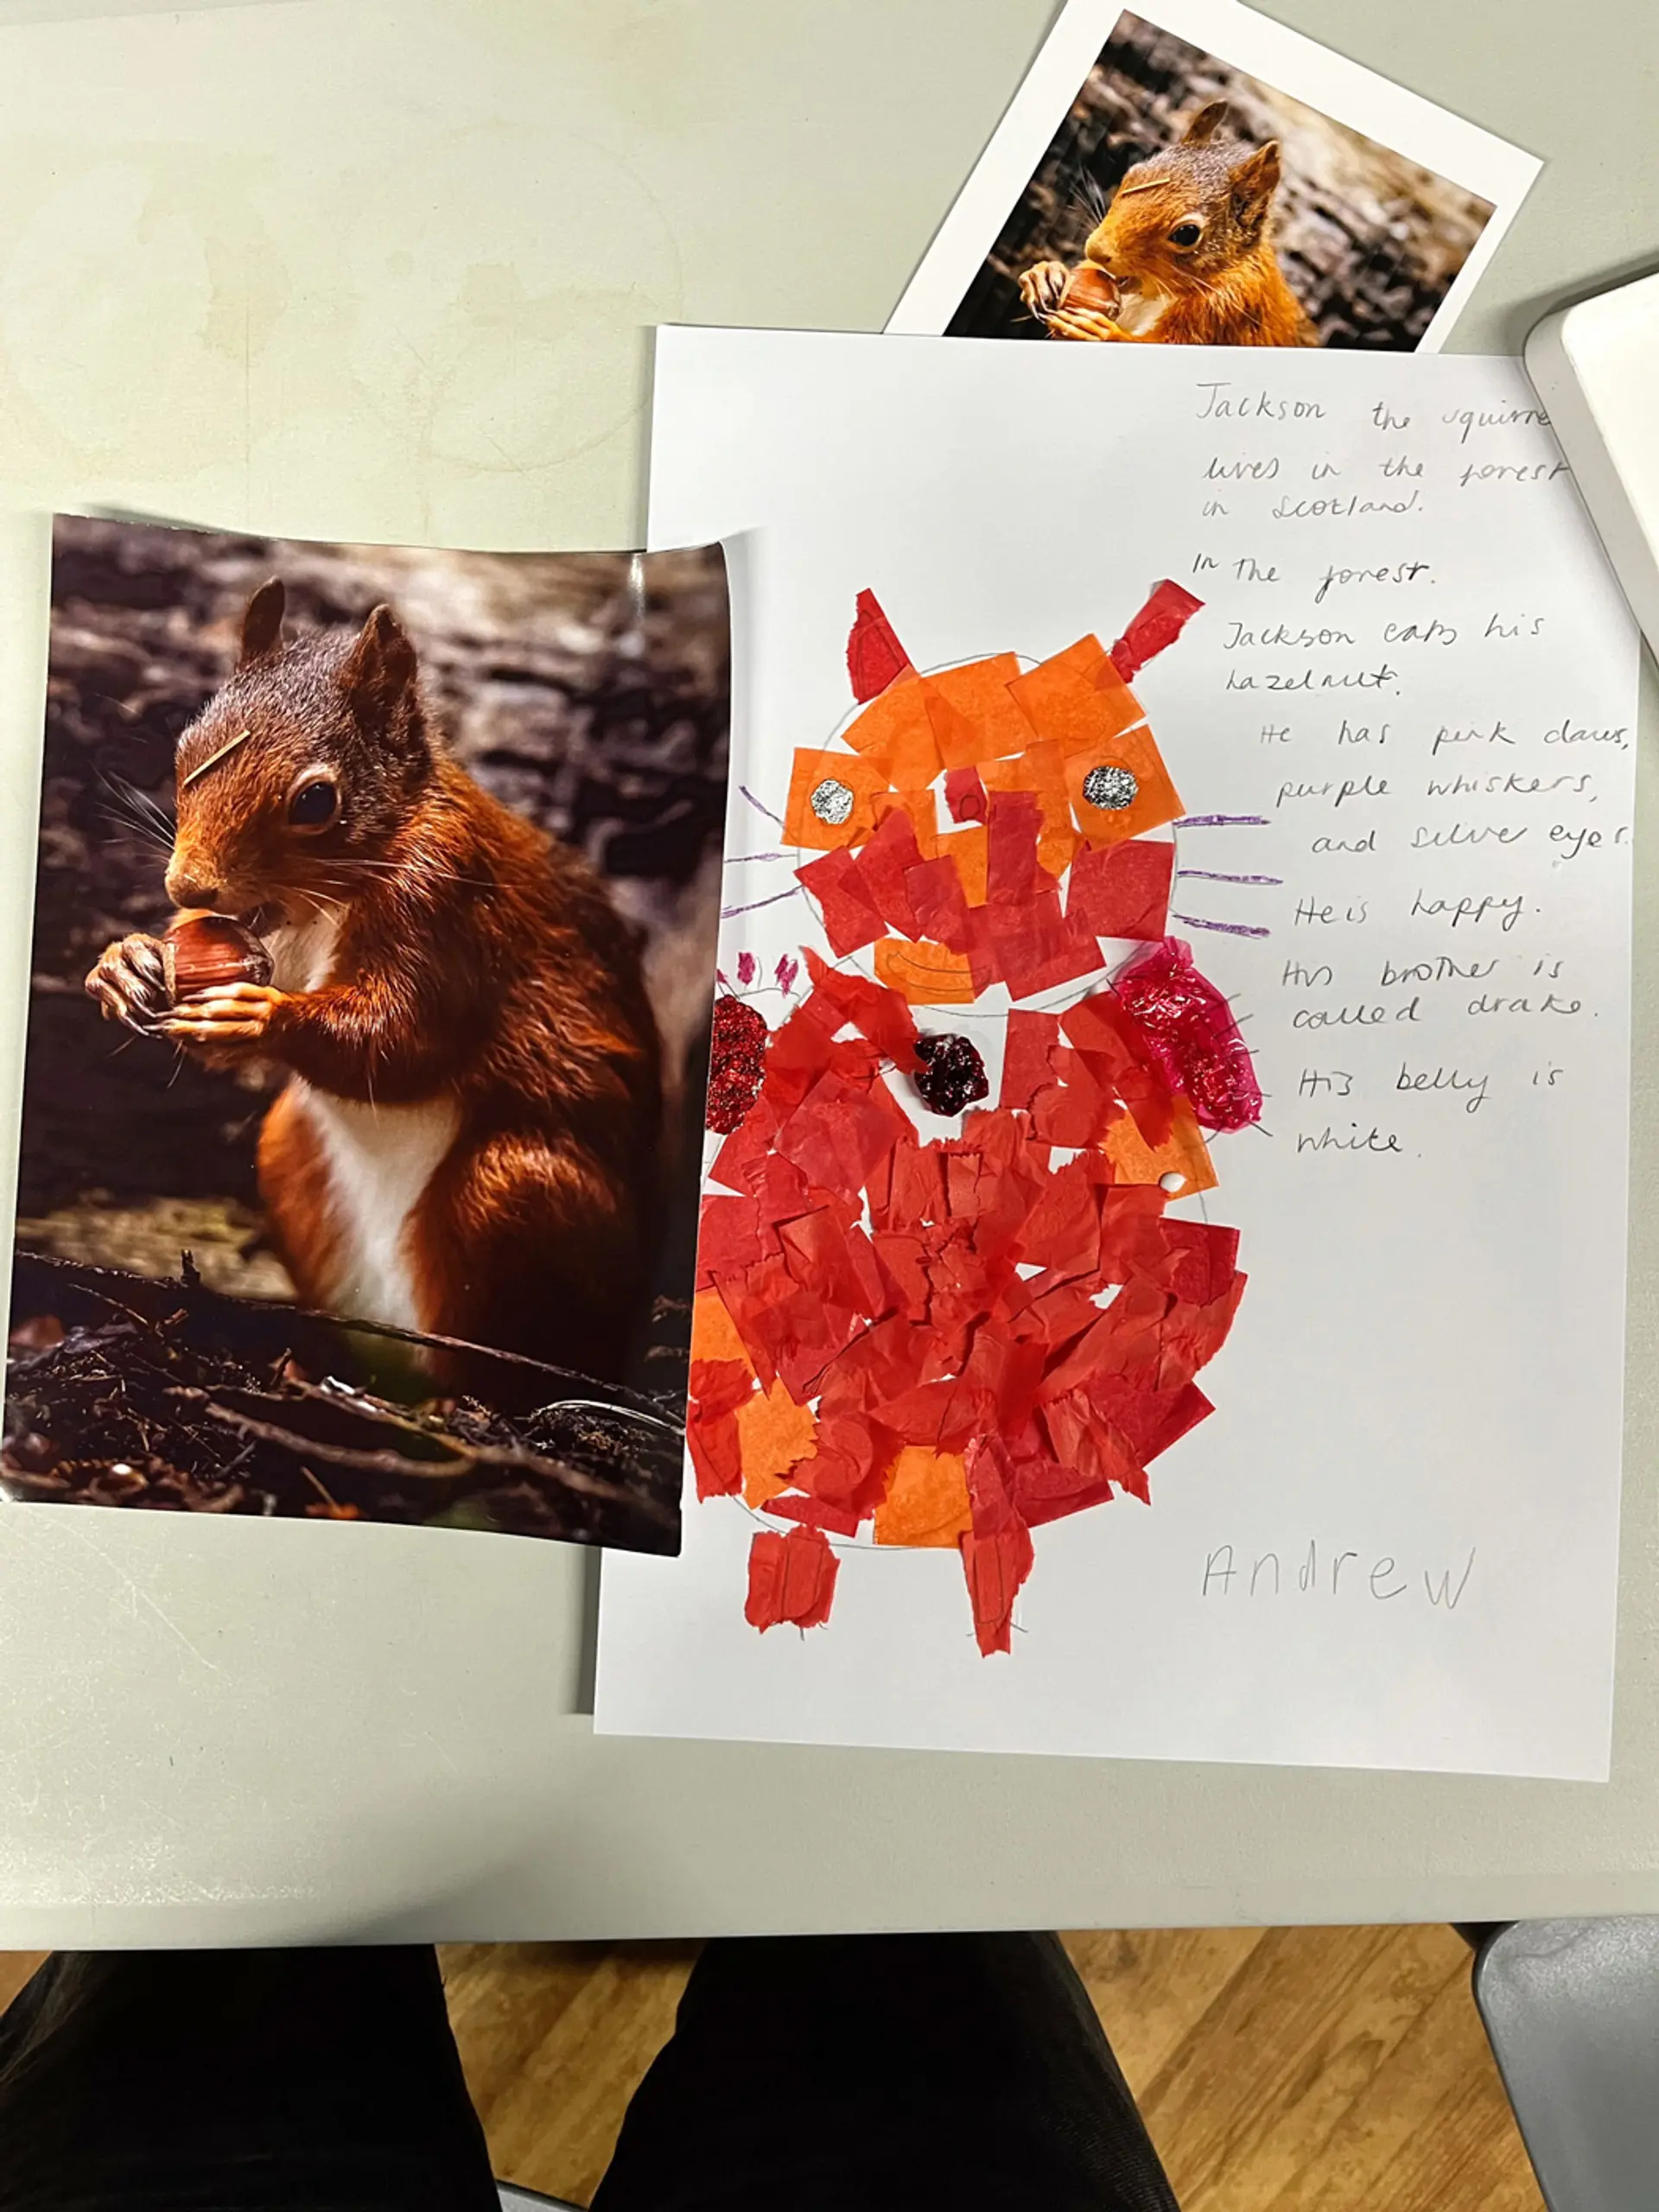 A photograph of a red squirrel eating a nut is beside an artwork of the same squirrel. He is made from red and orange tissue paper, with chocolate quality street wrappers for his paws and silver foil for his eyes. 